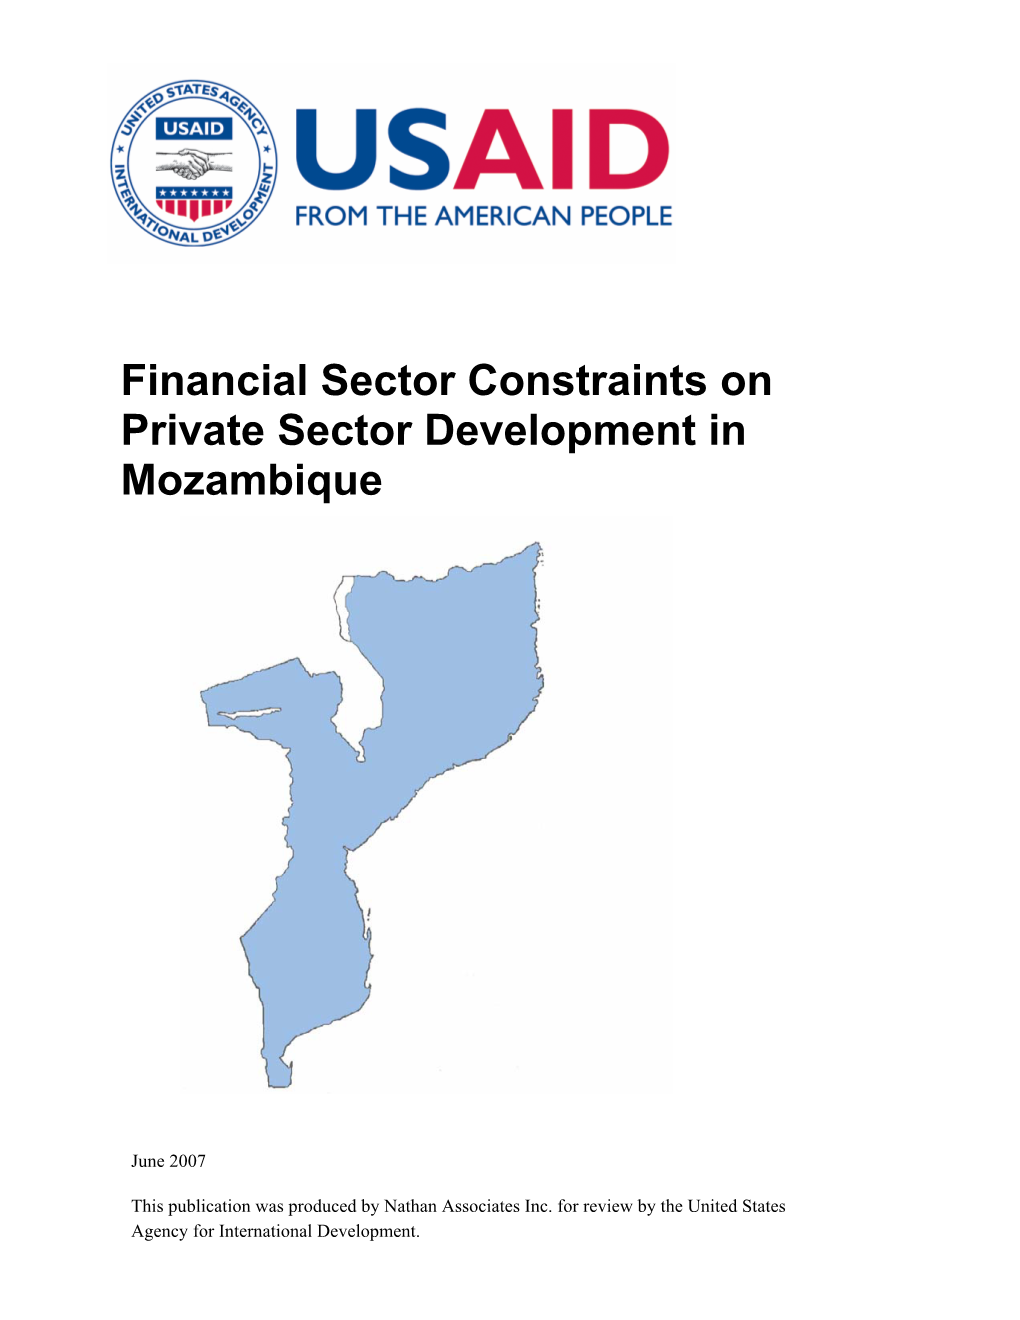 Financial Sector Constraints on Private Sector Development in Mozambique